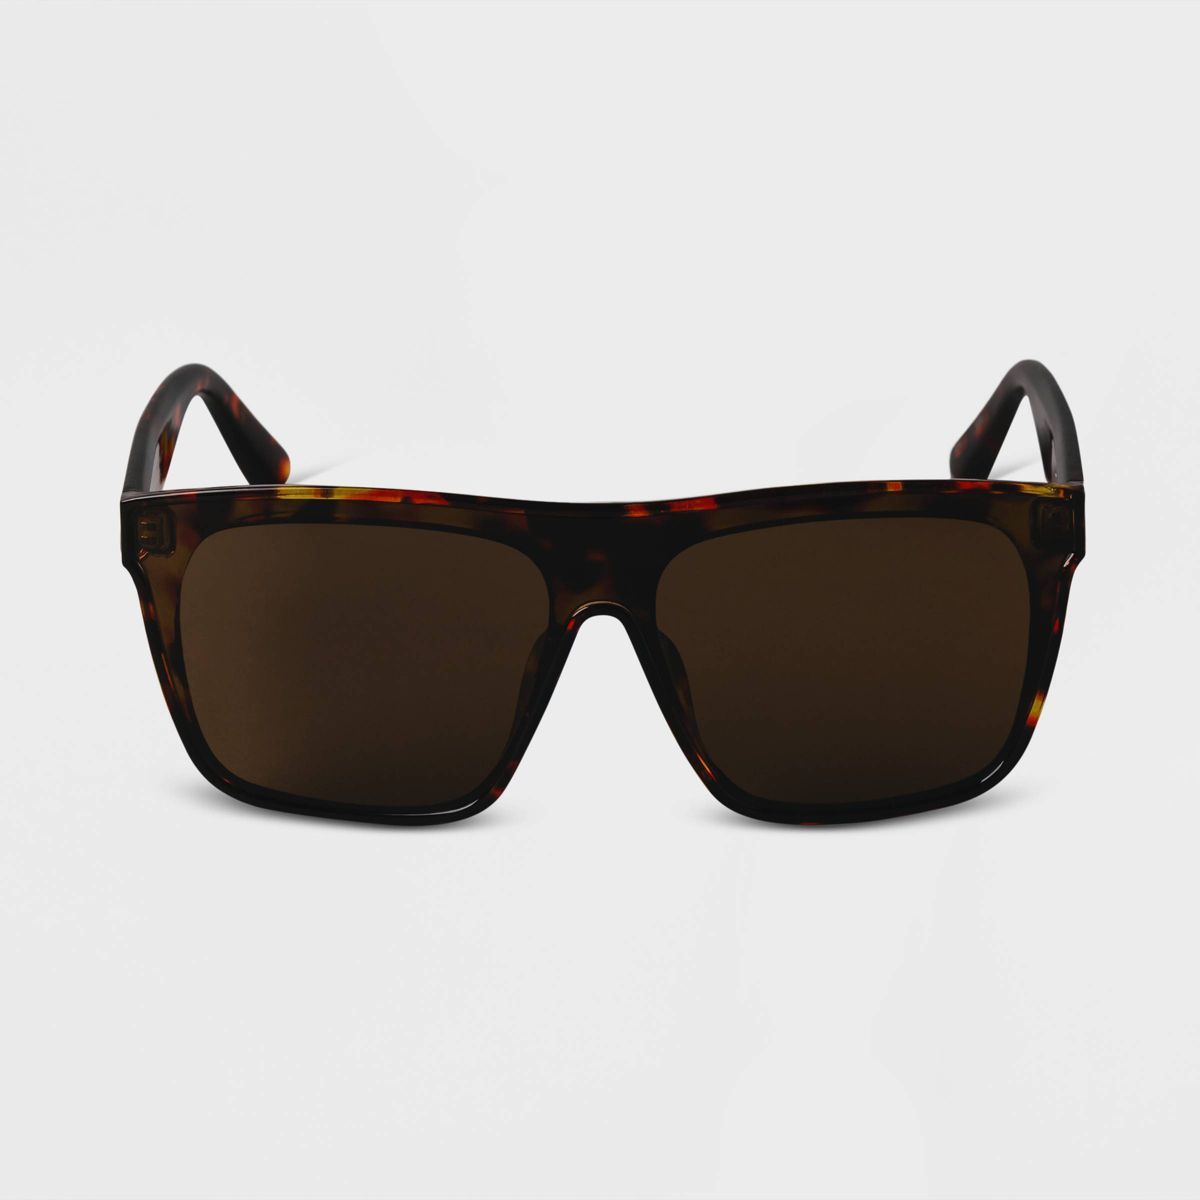 Women's Tortoise Shell Plastic Shield Sunglasses - A New Day™ Brown | Target